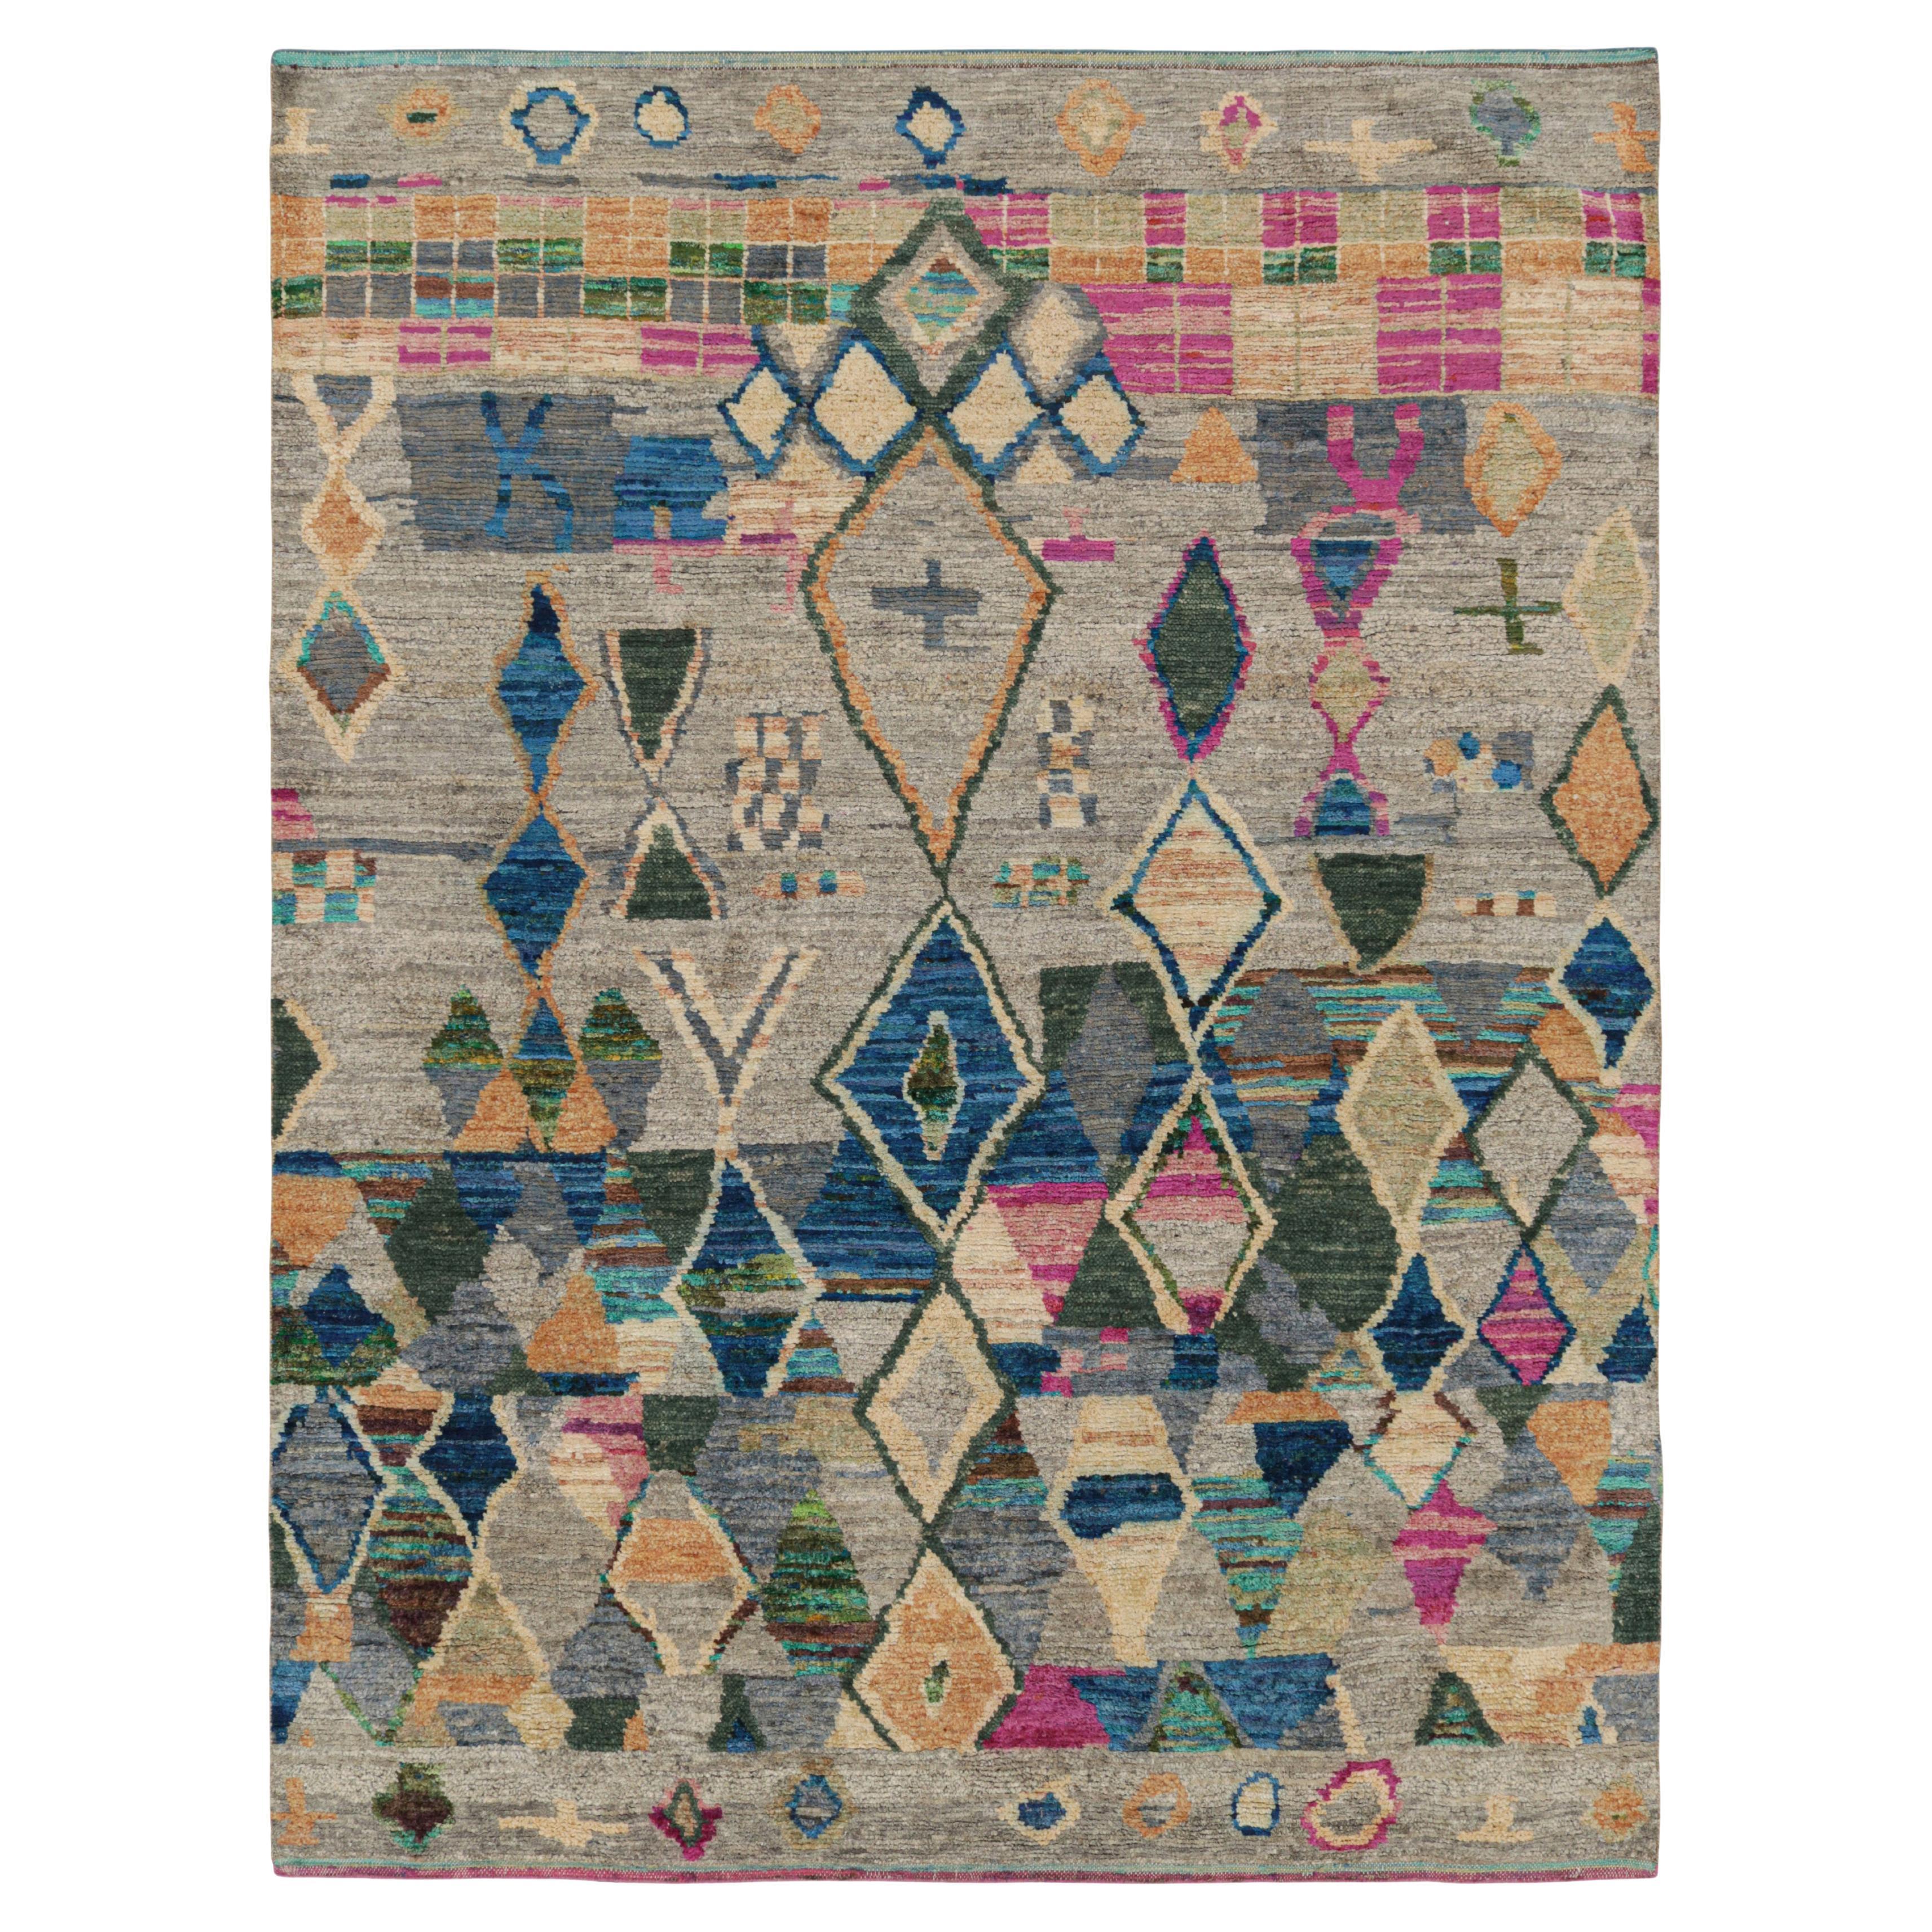 Rug & Kilim's Contemporary Moroccan Style Rug Polychromatic Geometric Patterns